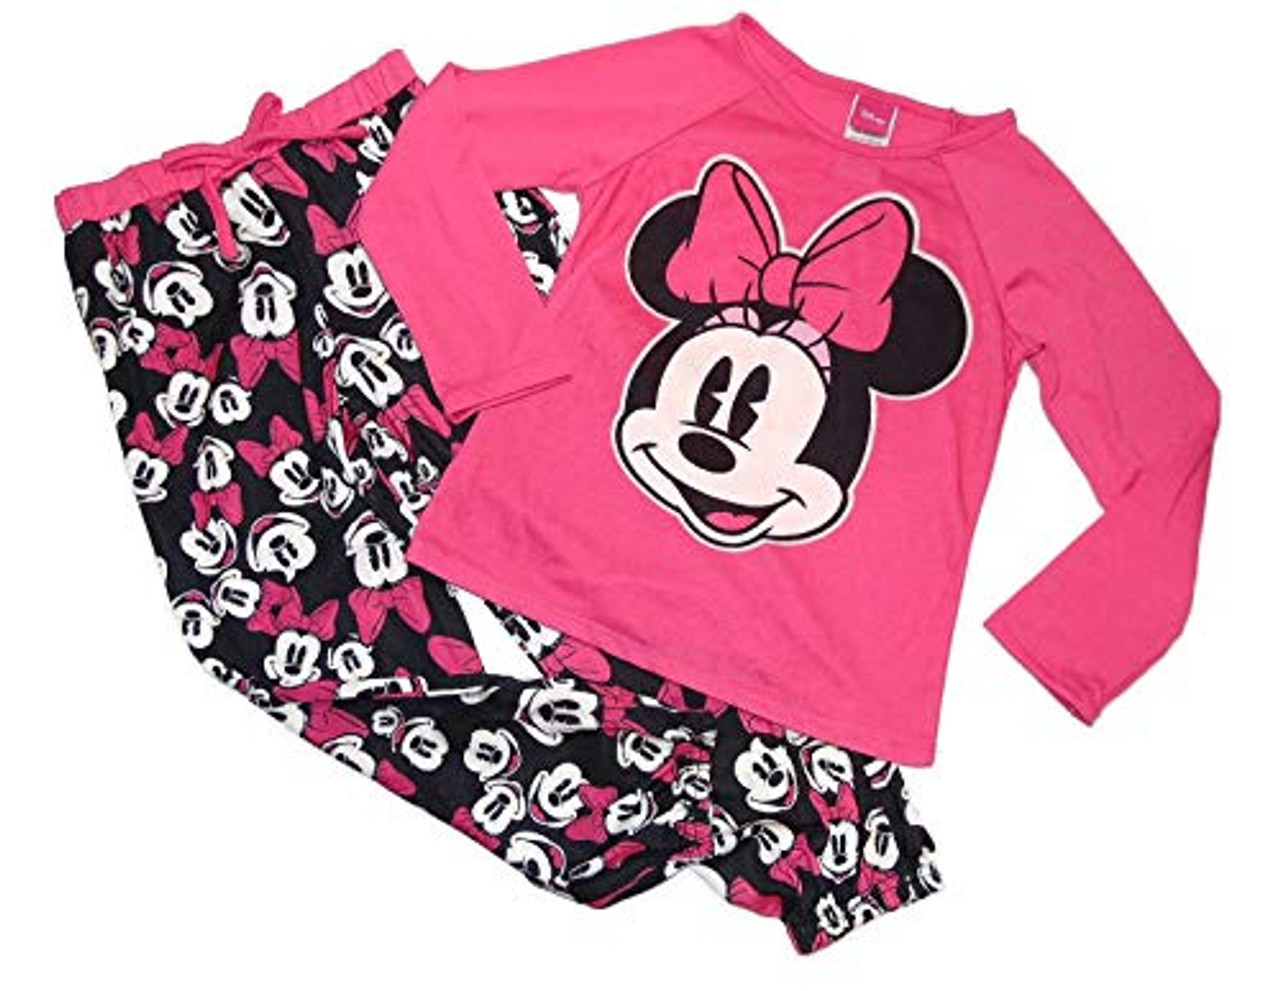 Minnie Mouse Girl's Pink and Black Polyester Jersey Pajama Set, Size 6/6X -  Little Dreamers Pajamas